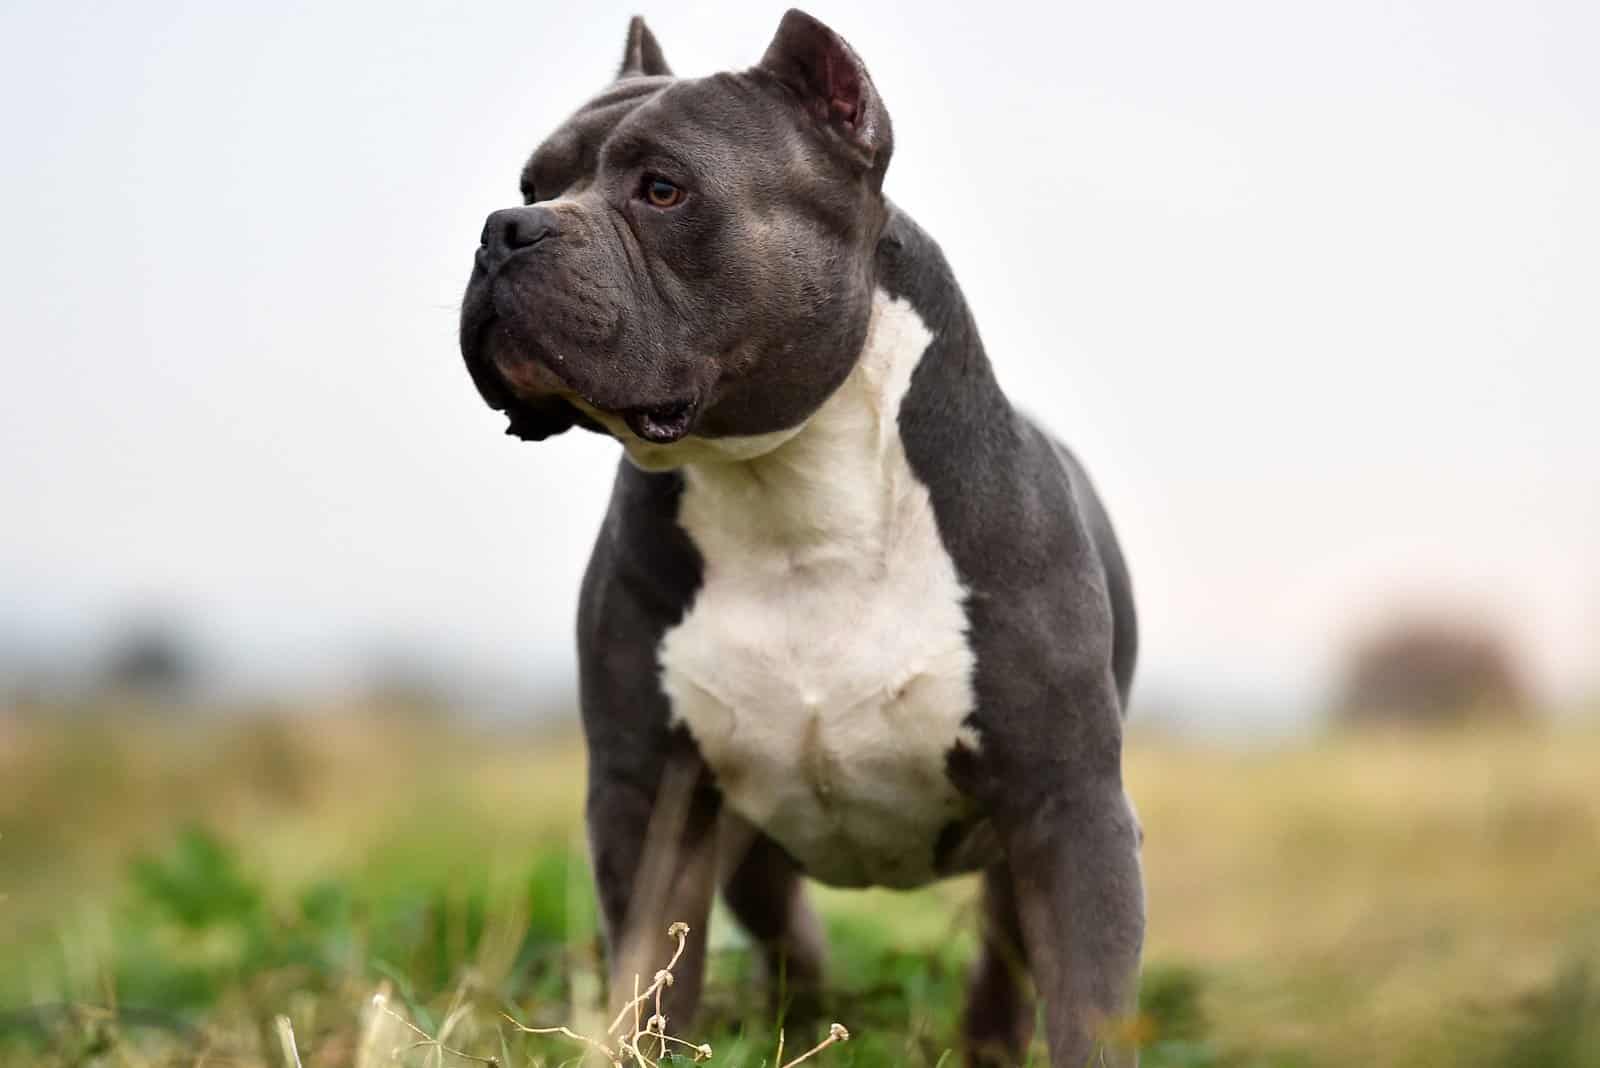 American Bully Growth Chart: Here’s How Your Bully Grows